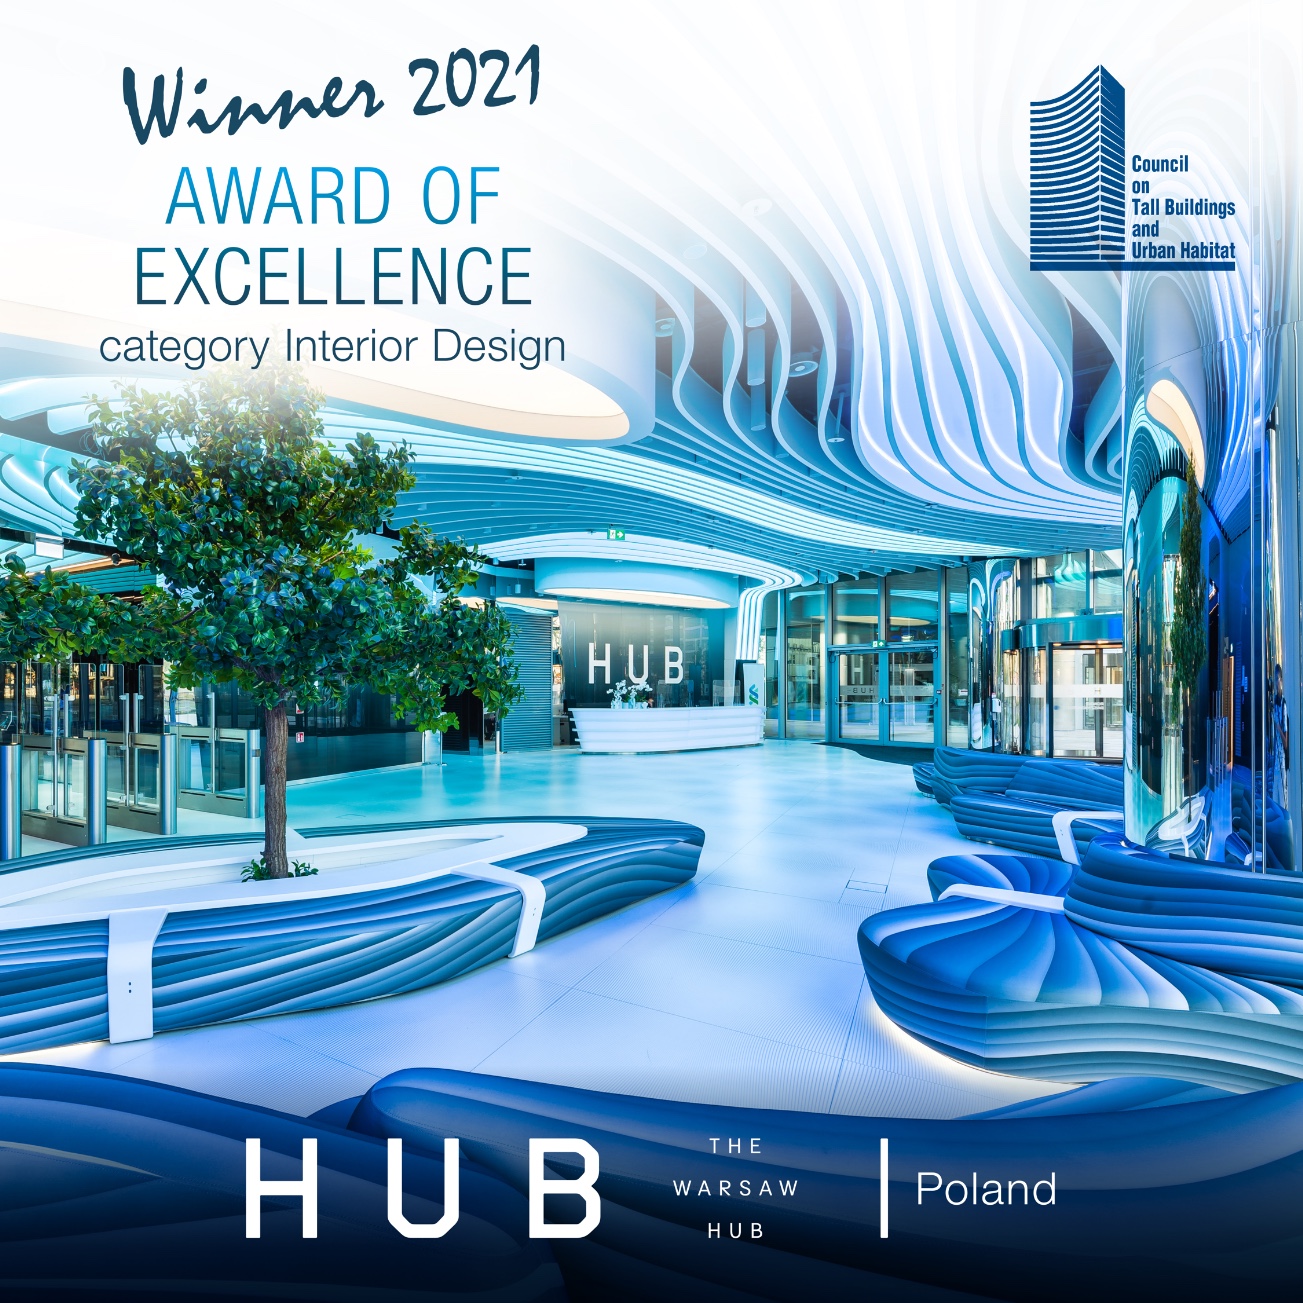 CTBUH Award of Excellence for The Warsaw Hub